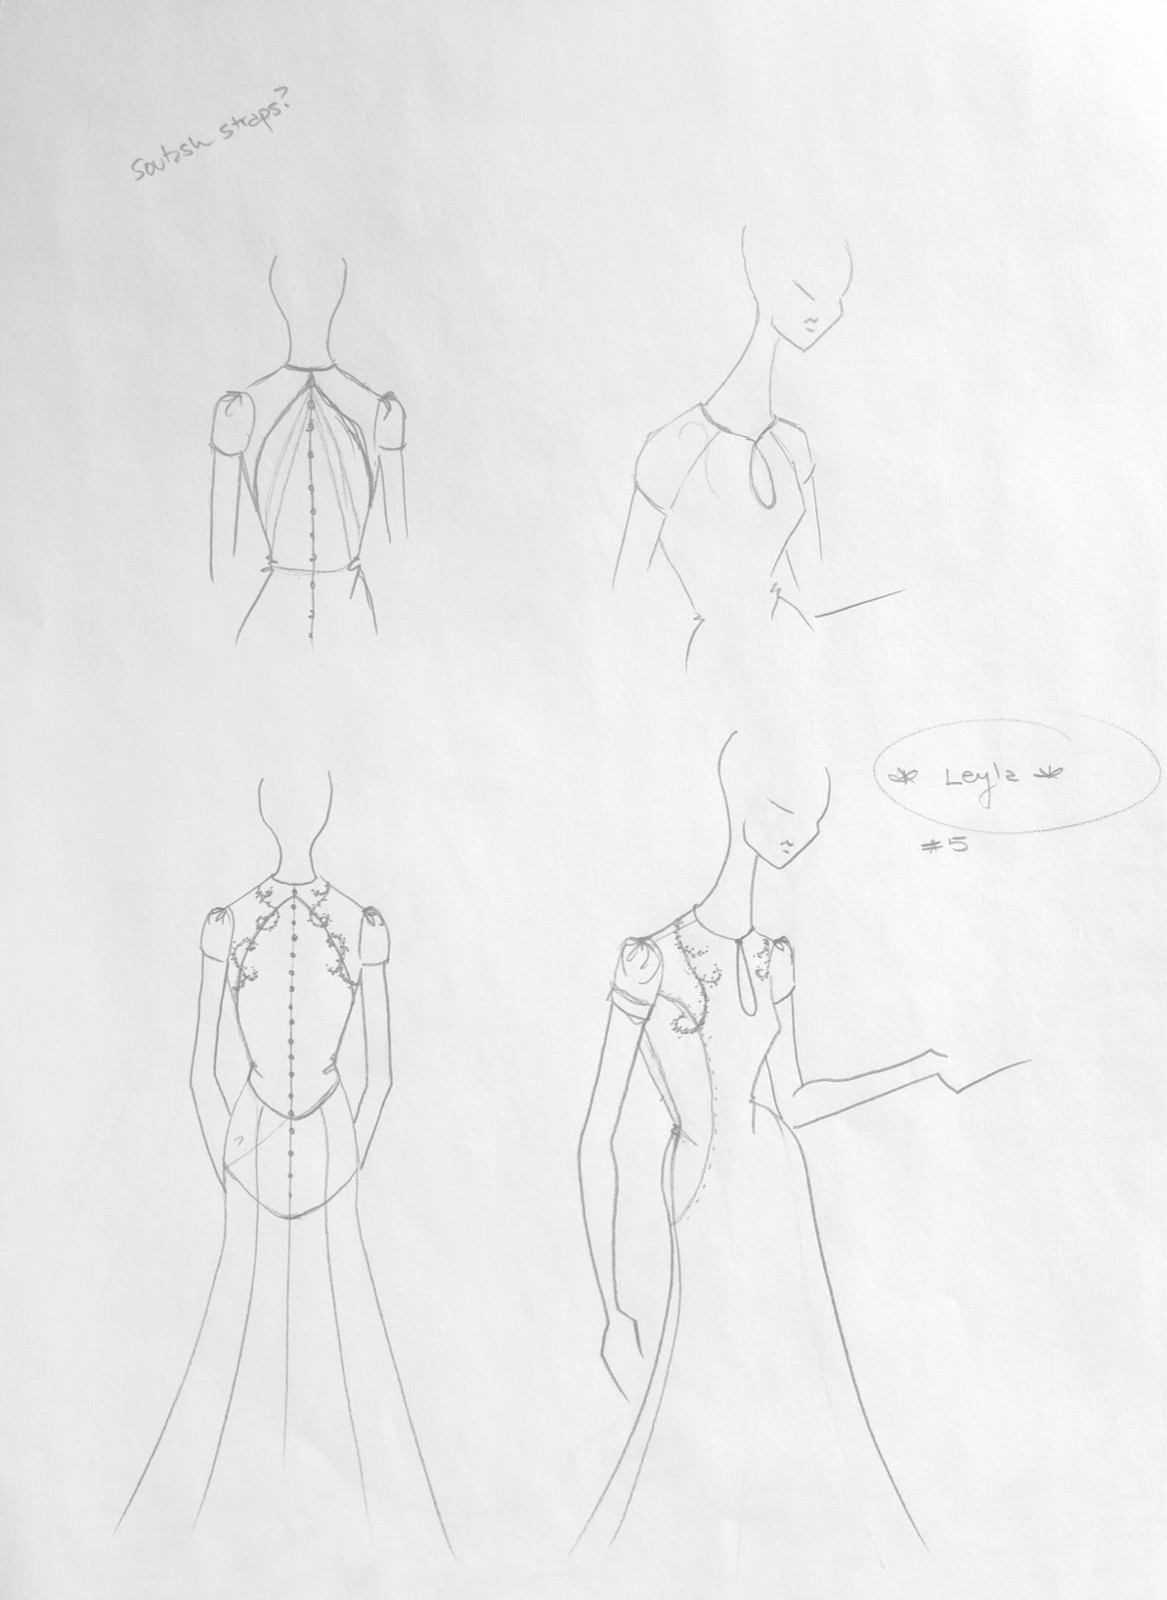 Options for the Leyla style by indie bridal designer Edith Elan